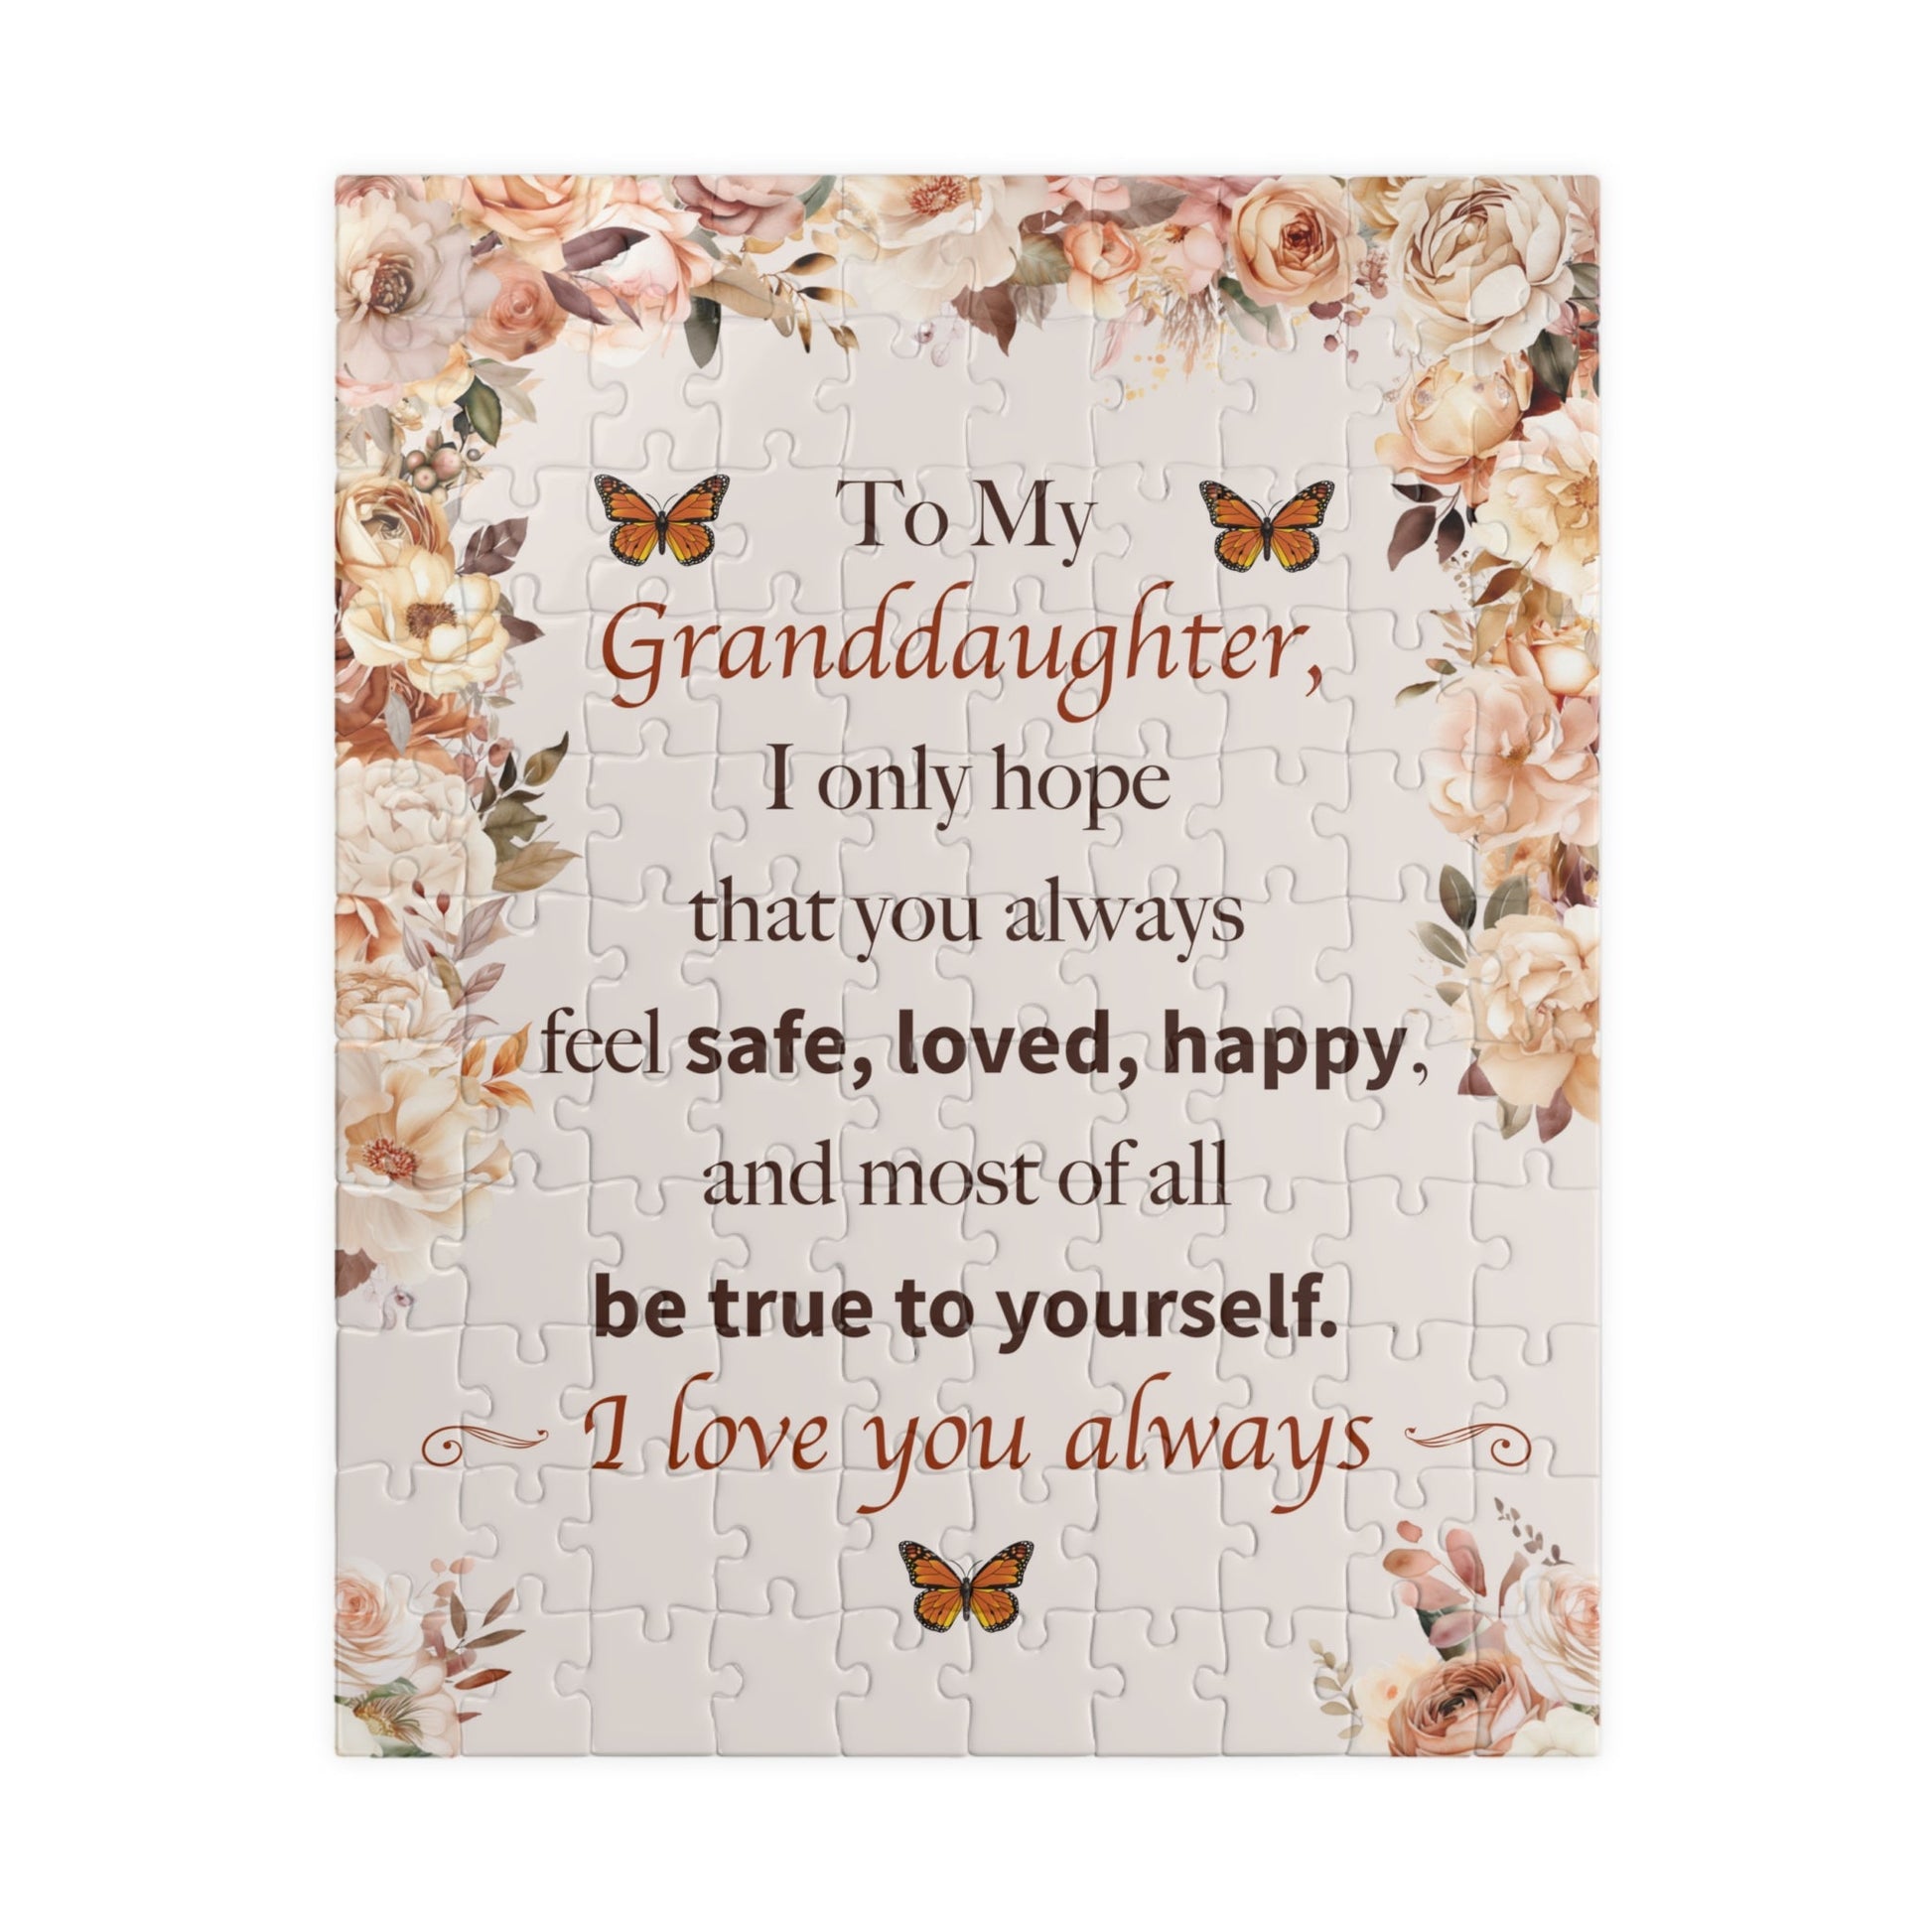 Granddaughter I Love You Puzzle - 110 pcs (Vertical)